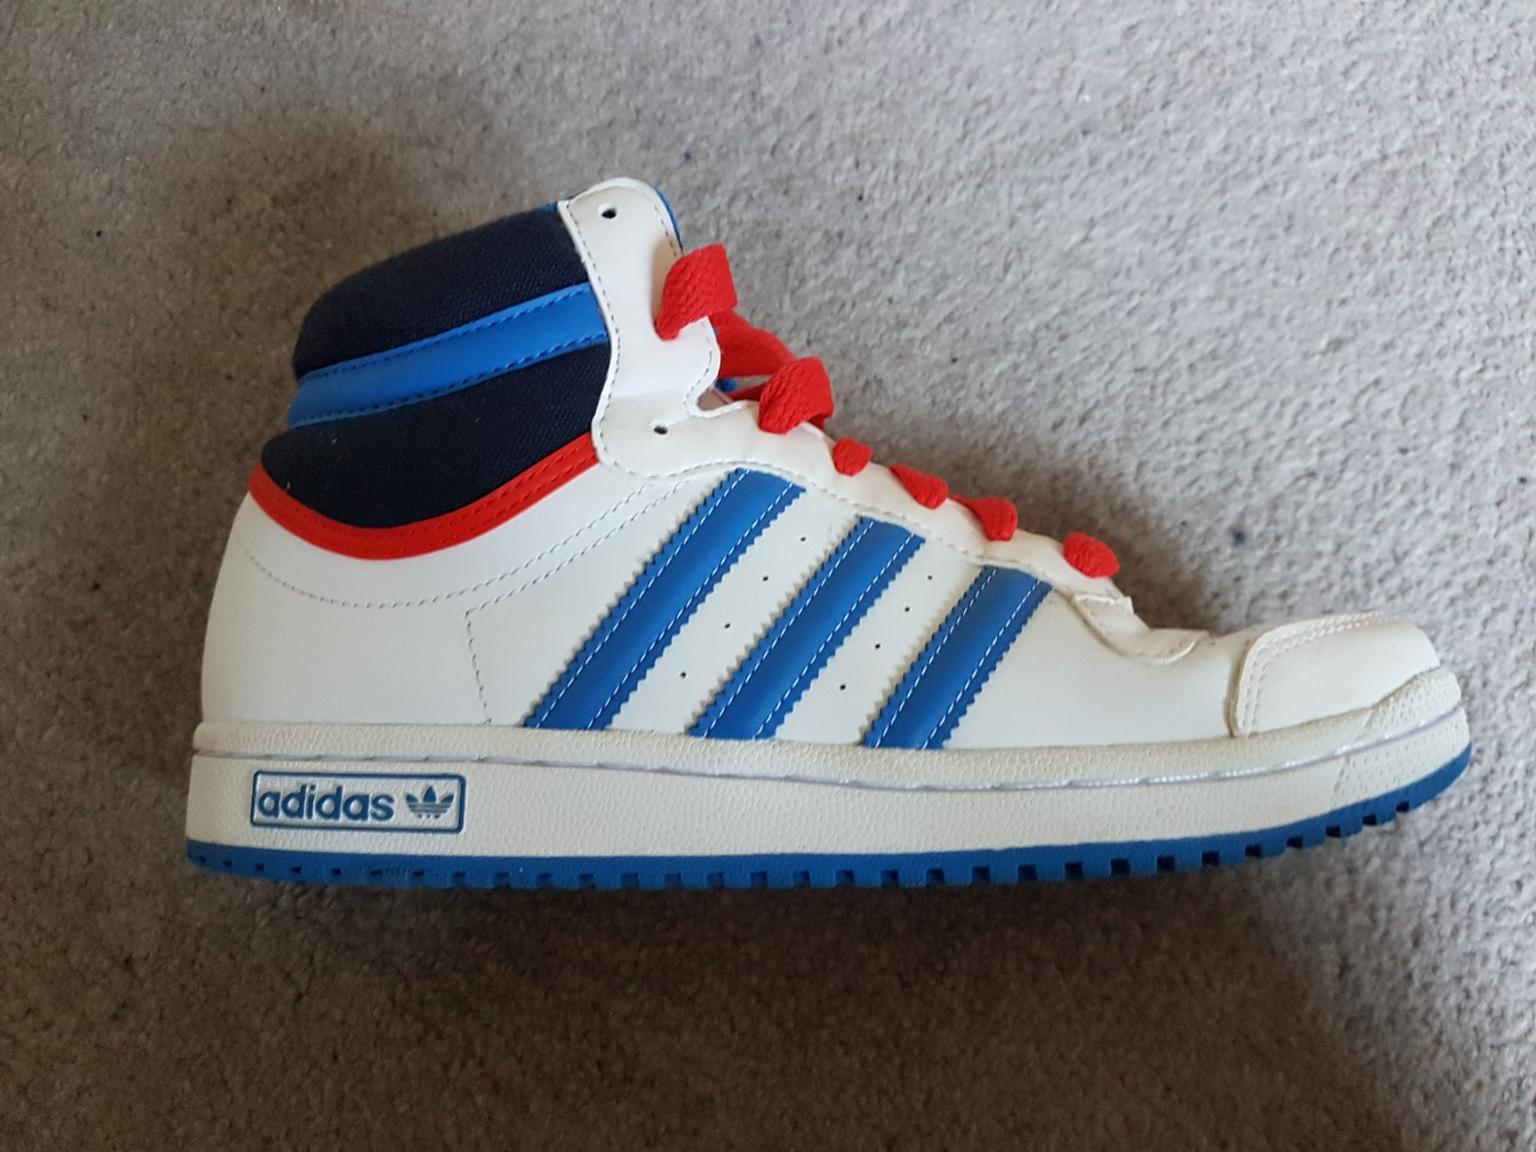 adidas high tops size 4